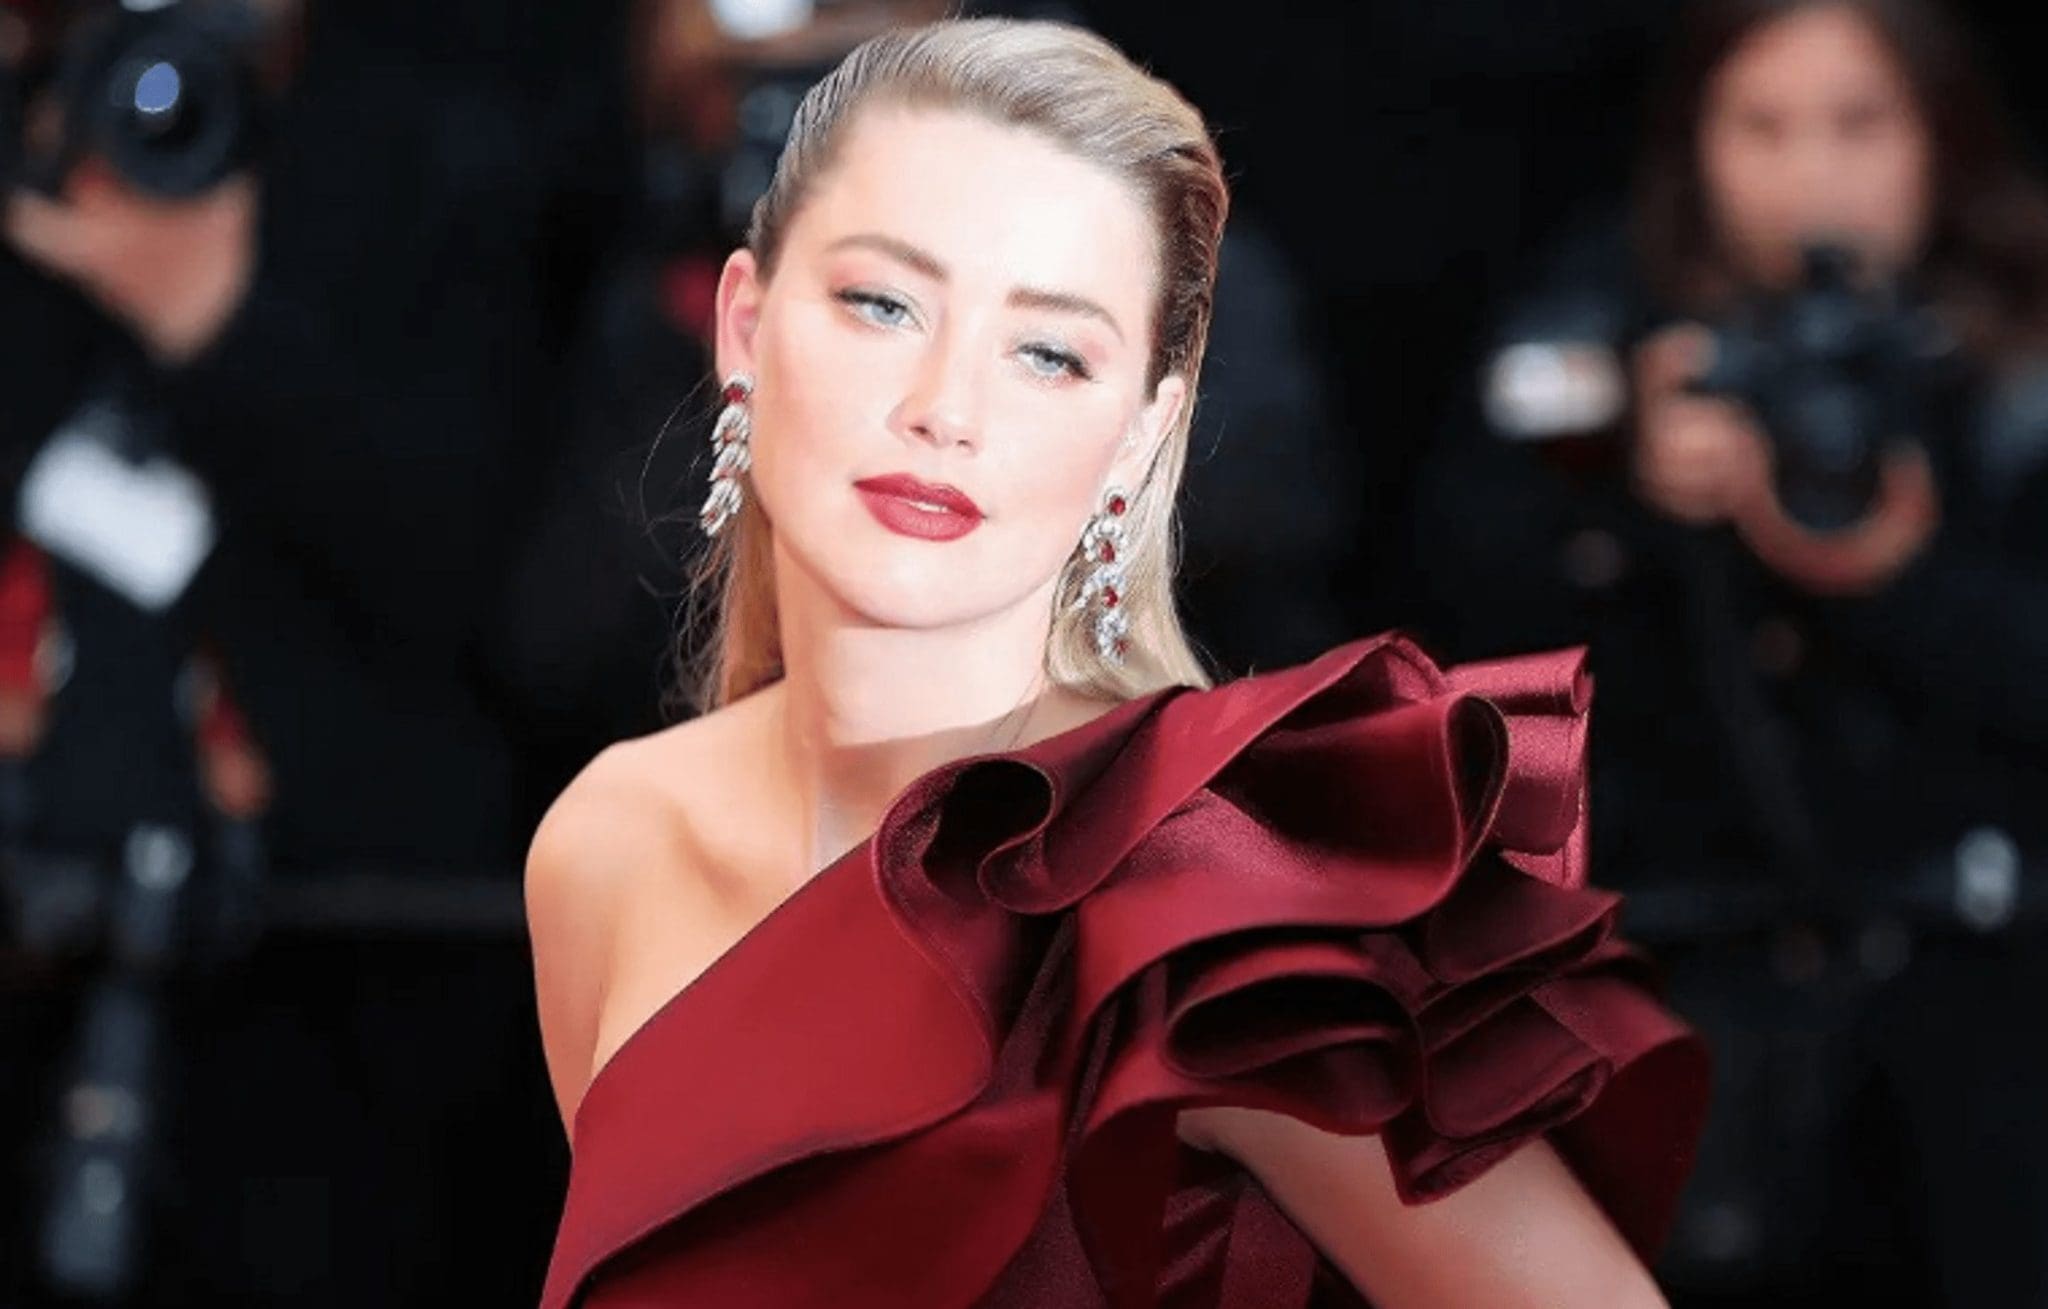 The surgeon said that the face of Amber Heard is almost 92% consistent with the golden ratio